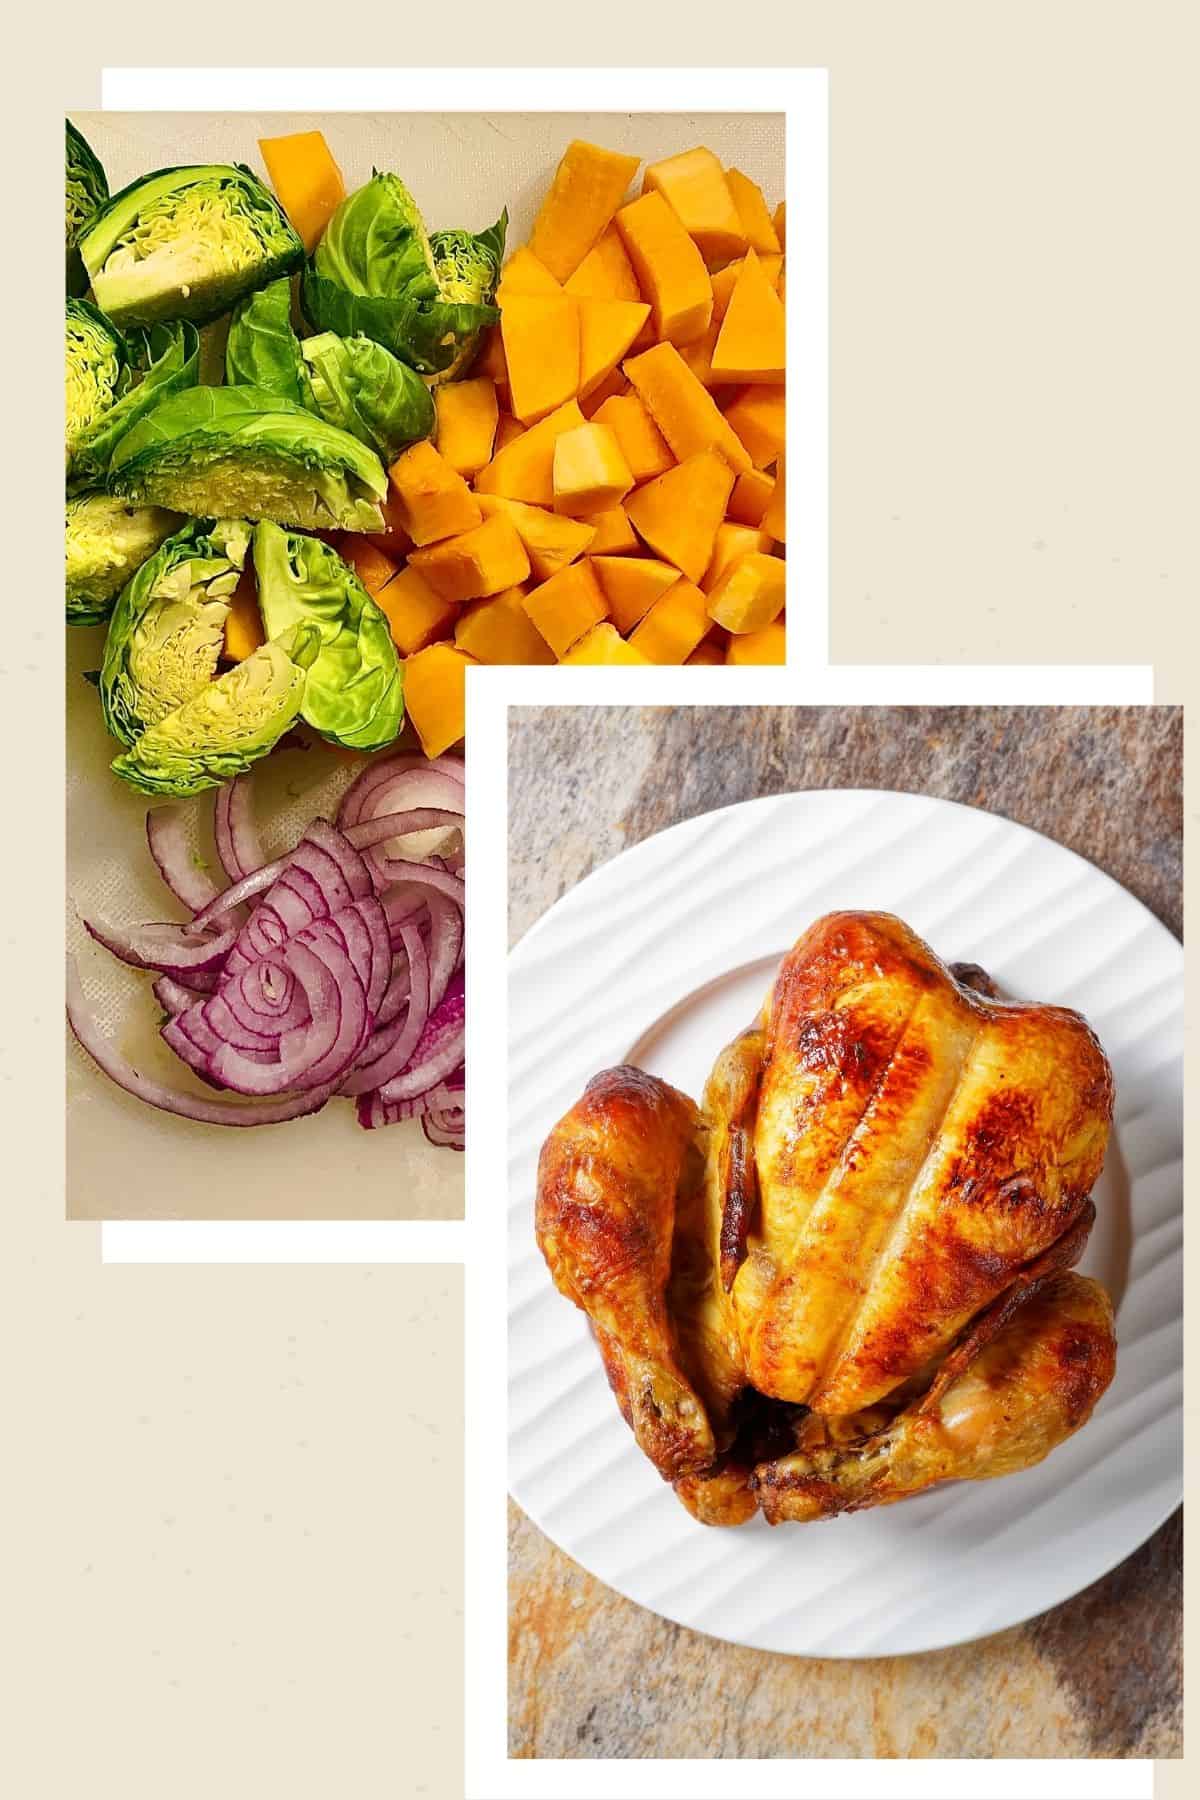 Collage of photos of a rotisserie chicken and chopped vegetables.